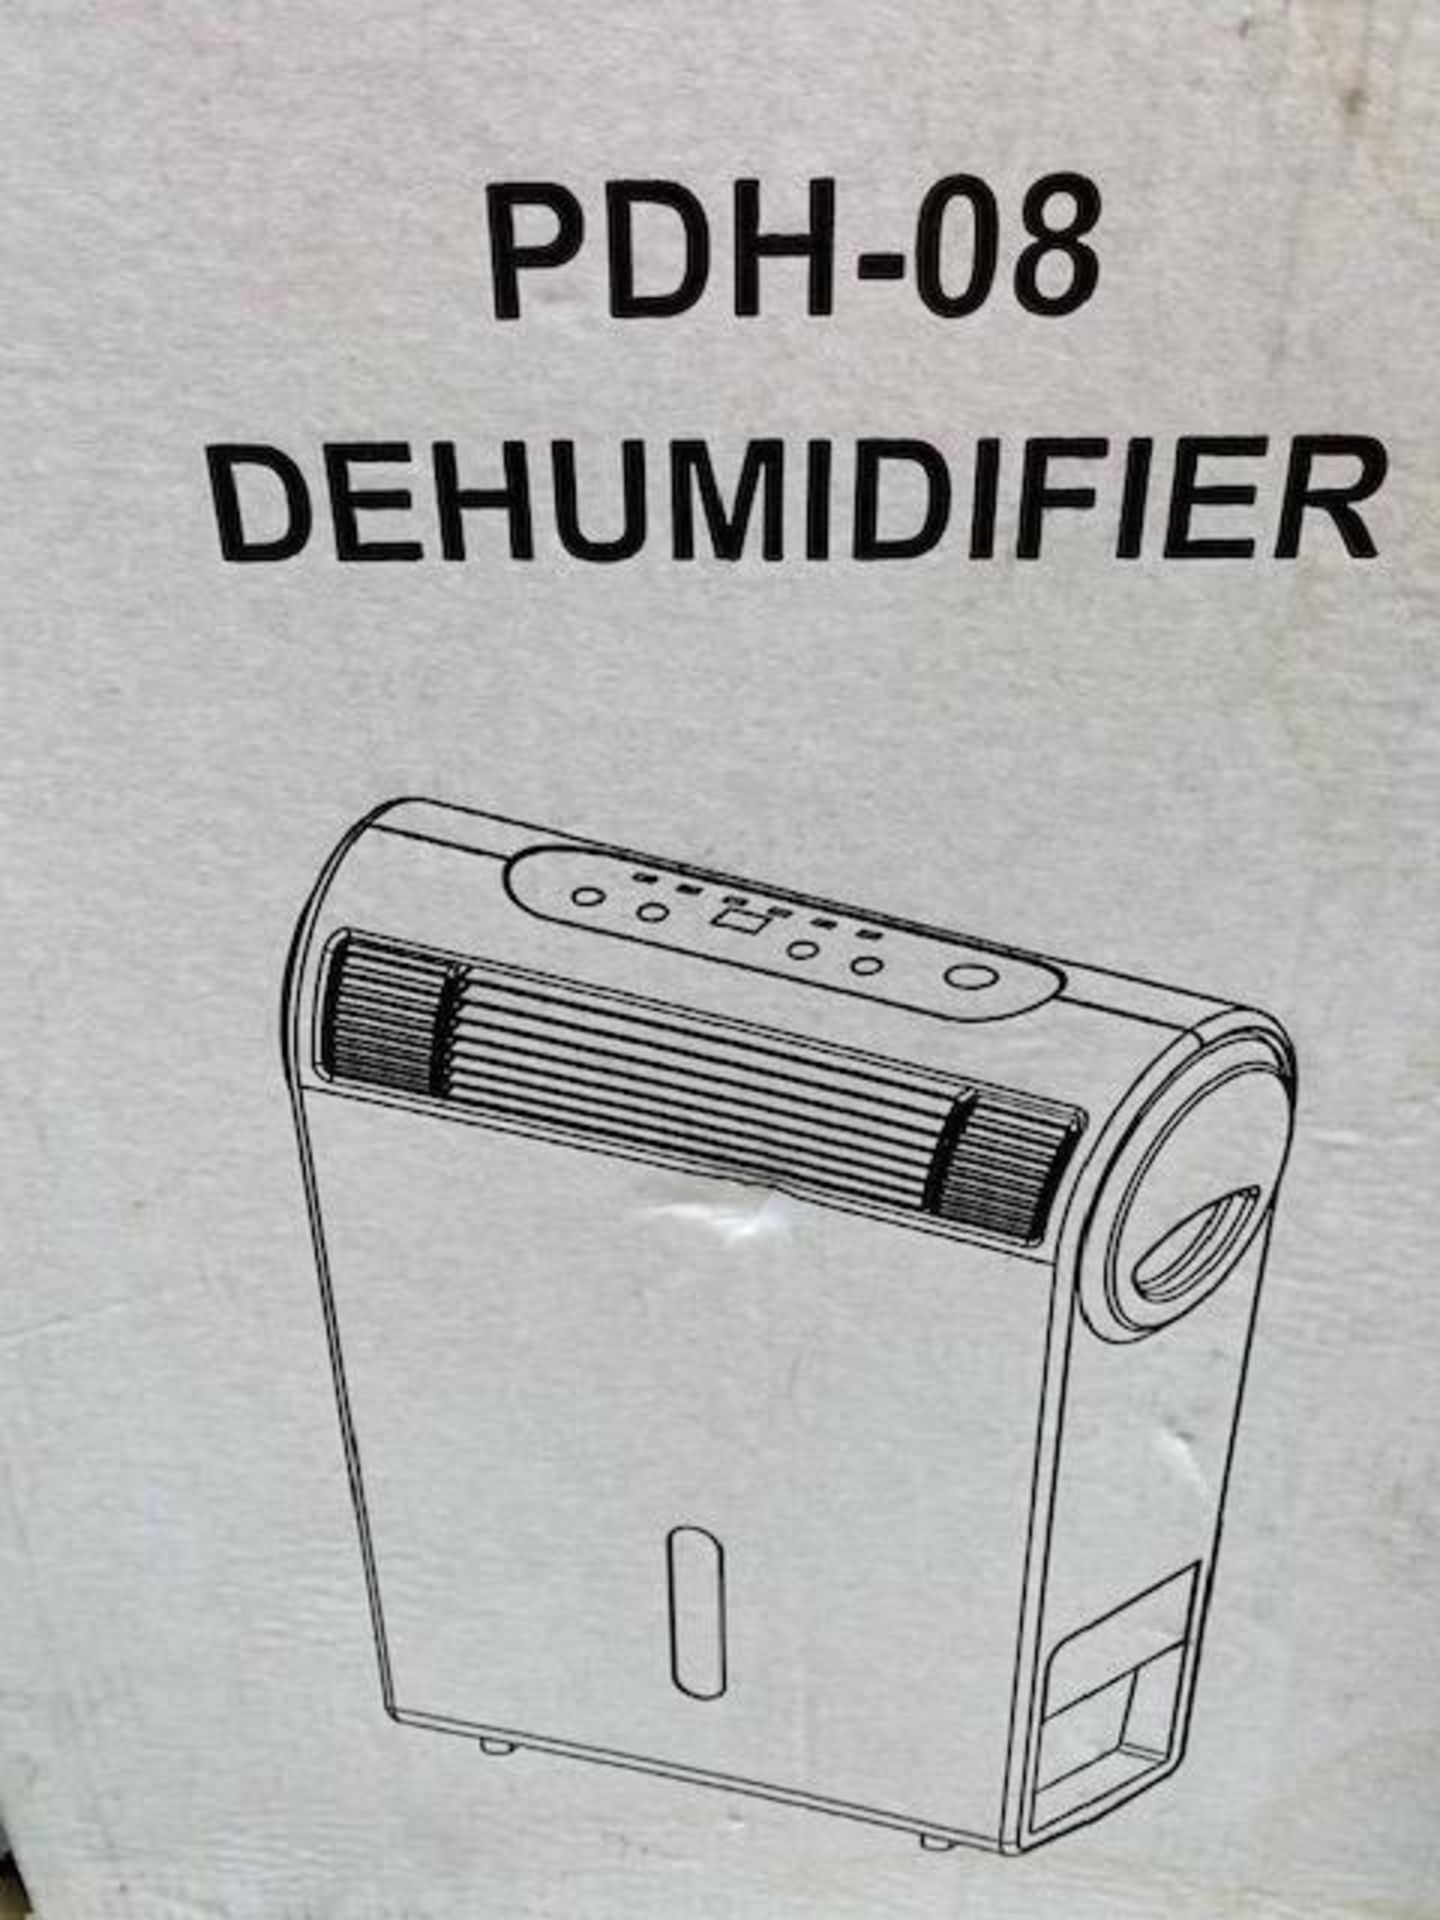 10x Servool PDH-08 Dehumidifiers, 220-240V, 50Hz - Image 10 of 12